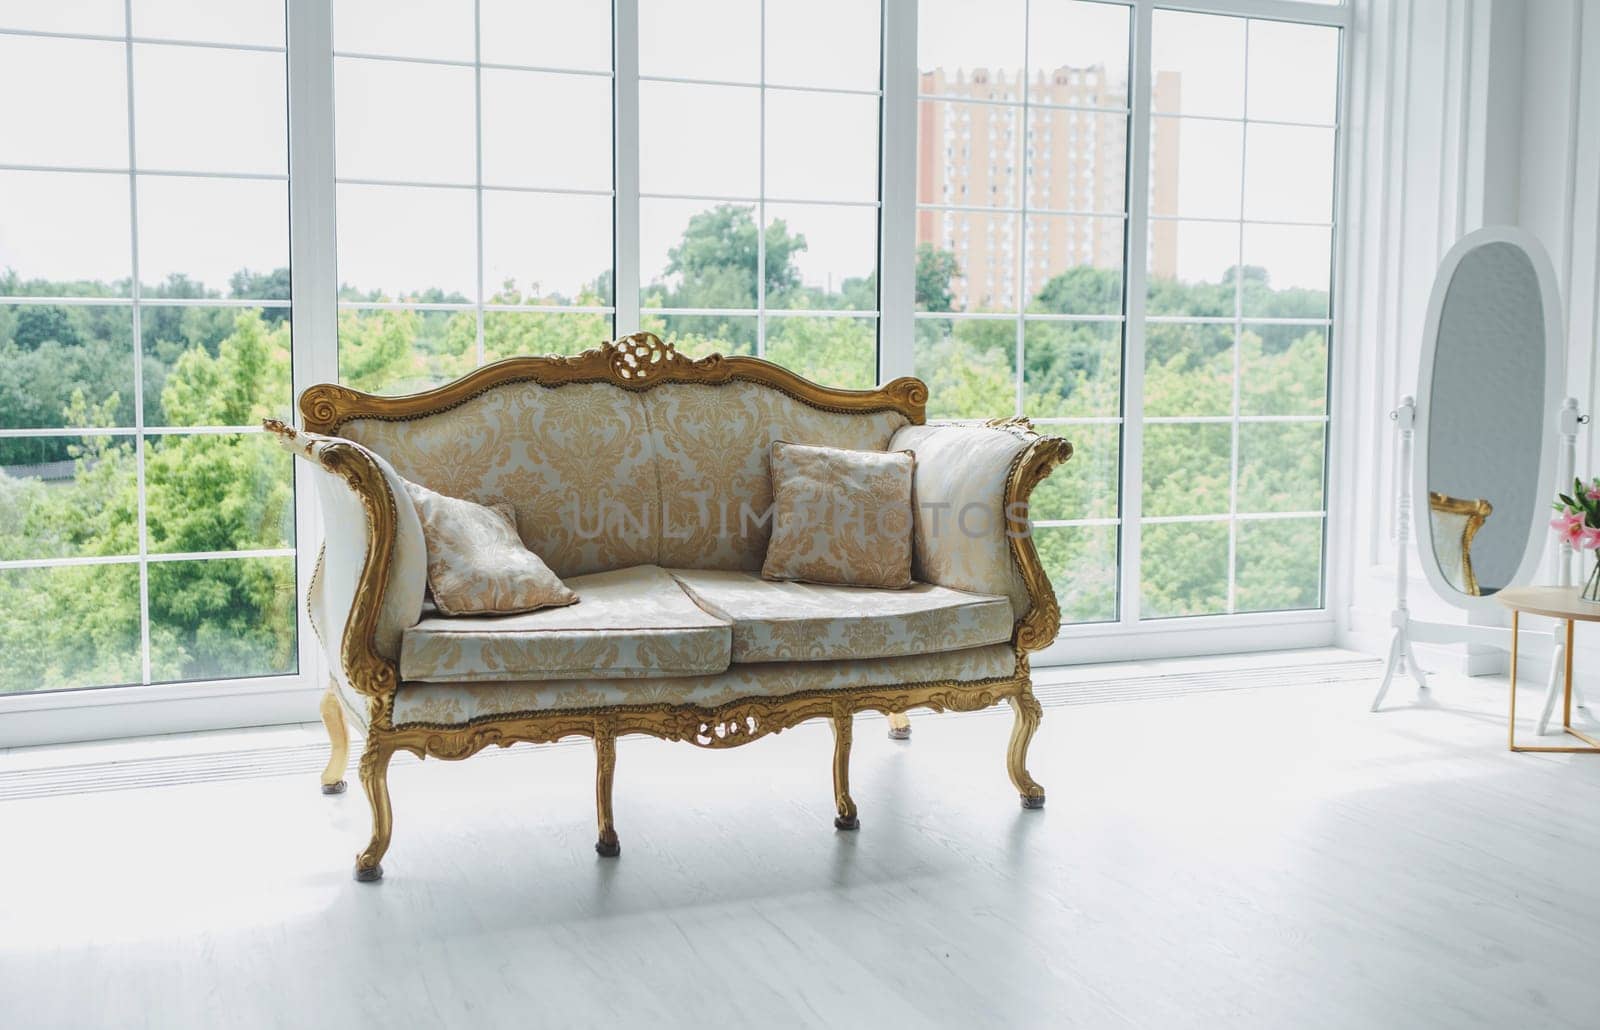 Vintage royal sofa in a room by Ladouski